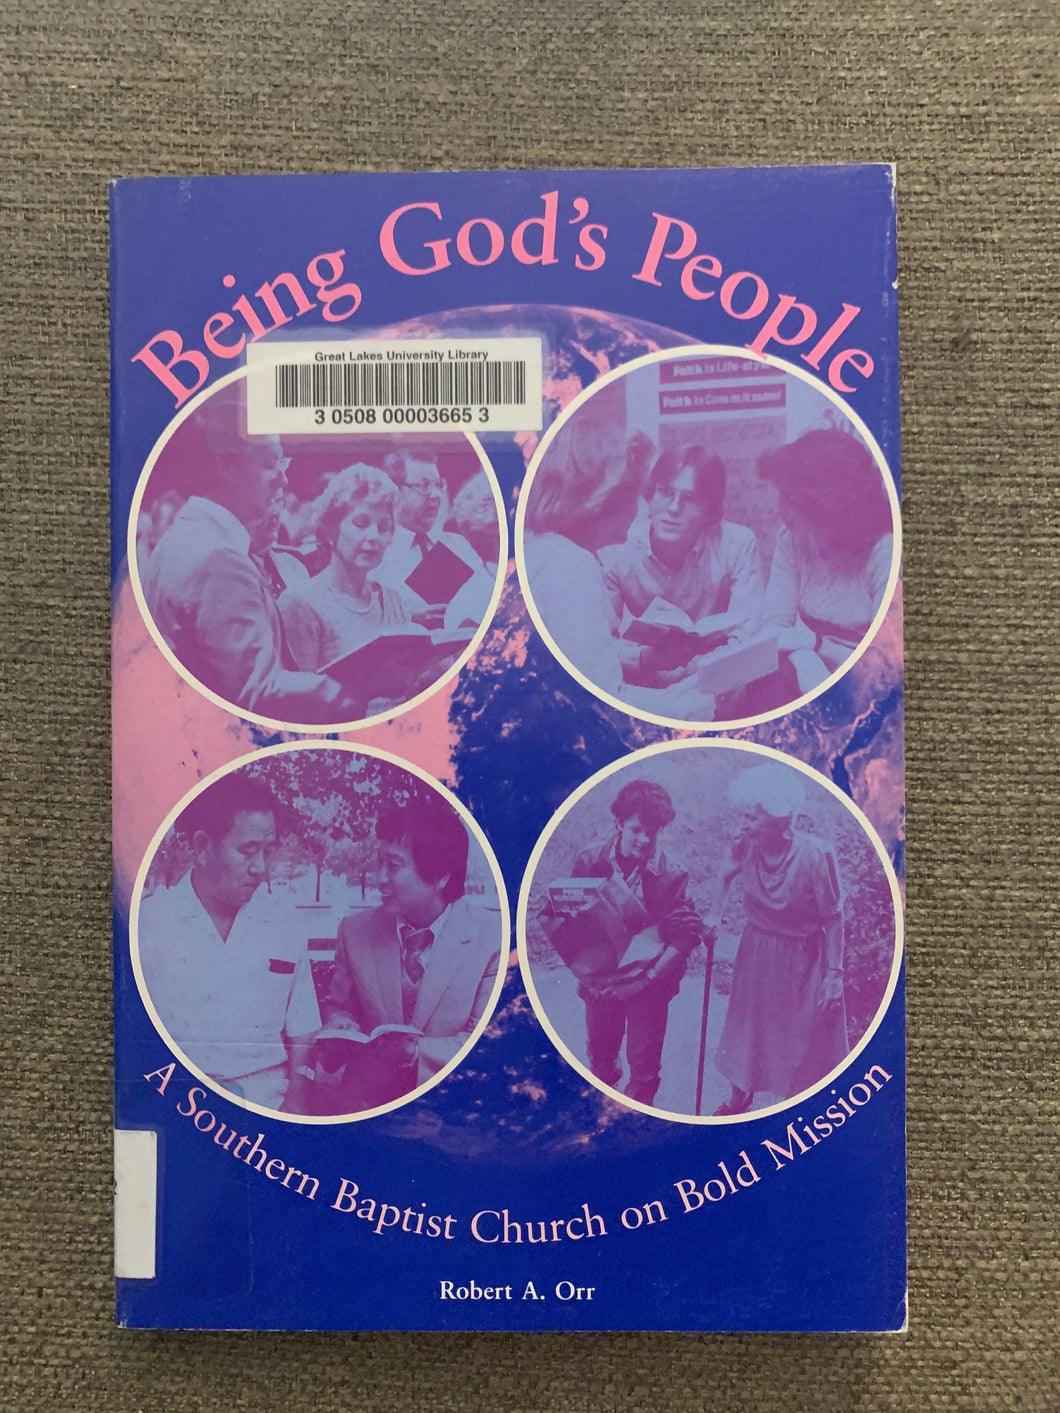 Being God's People by Robert A. Orr